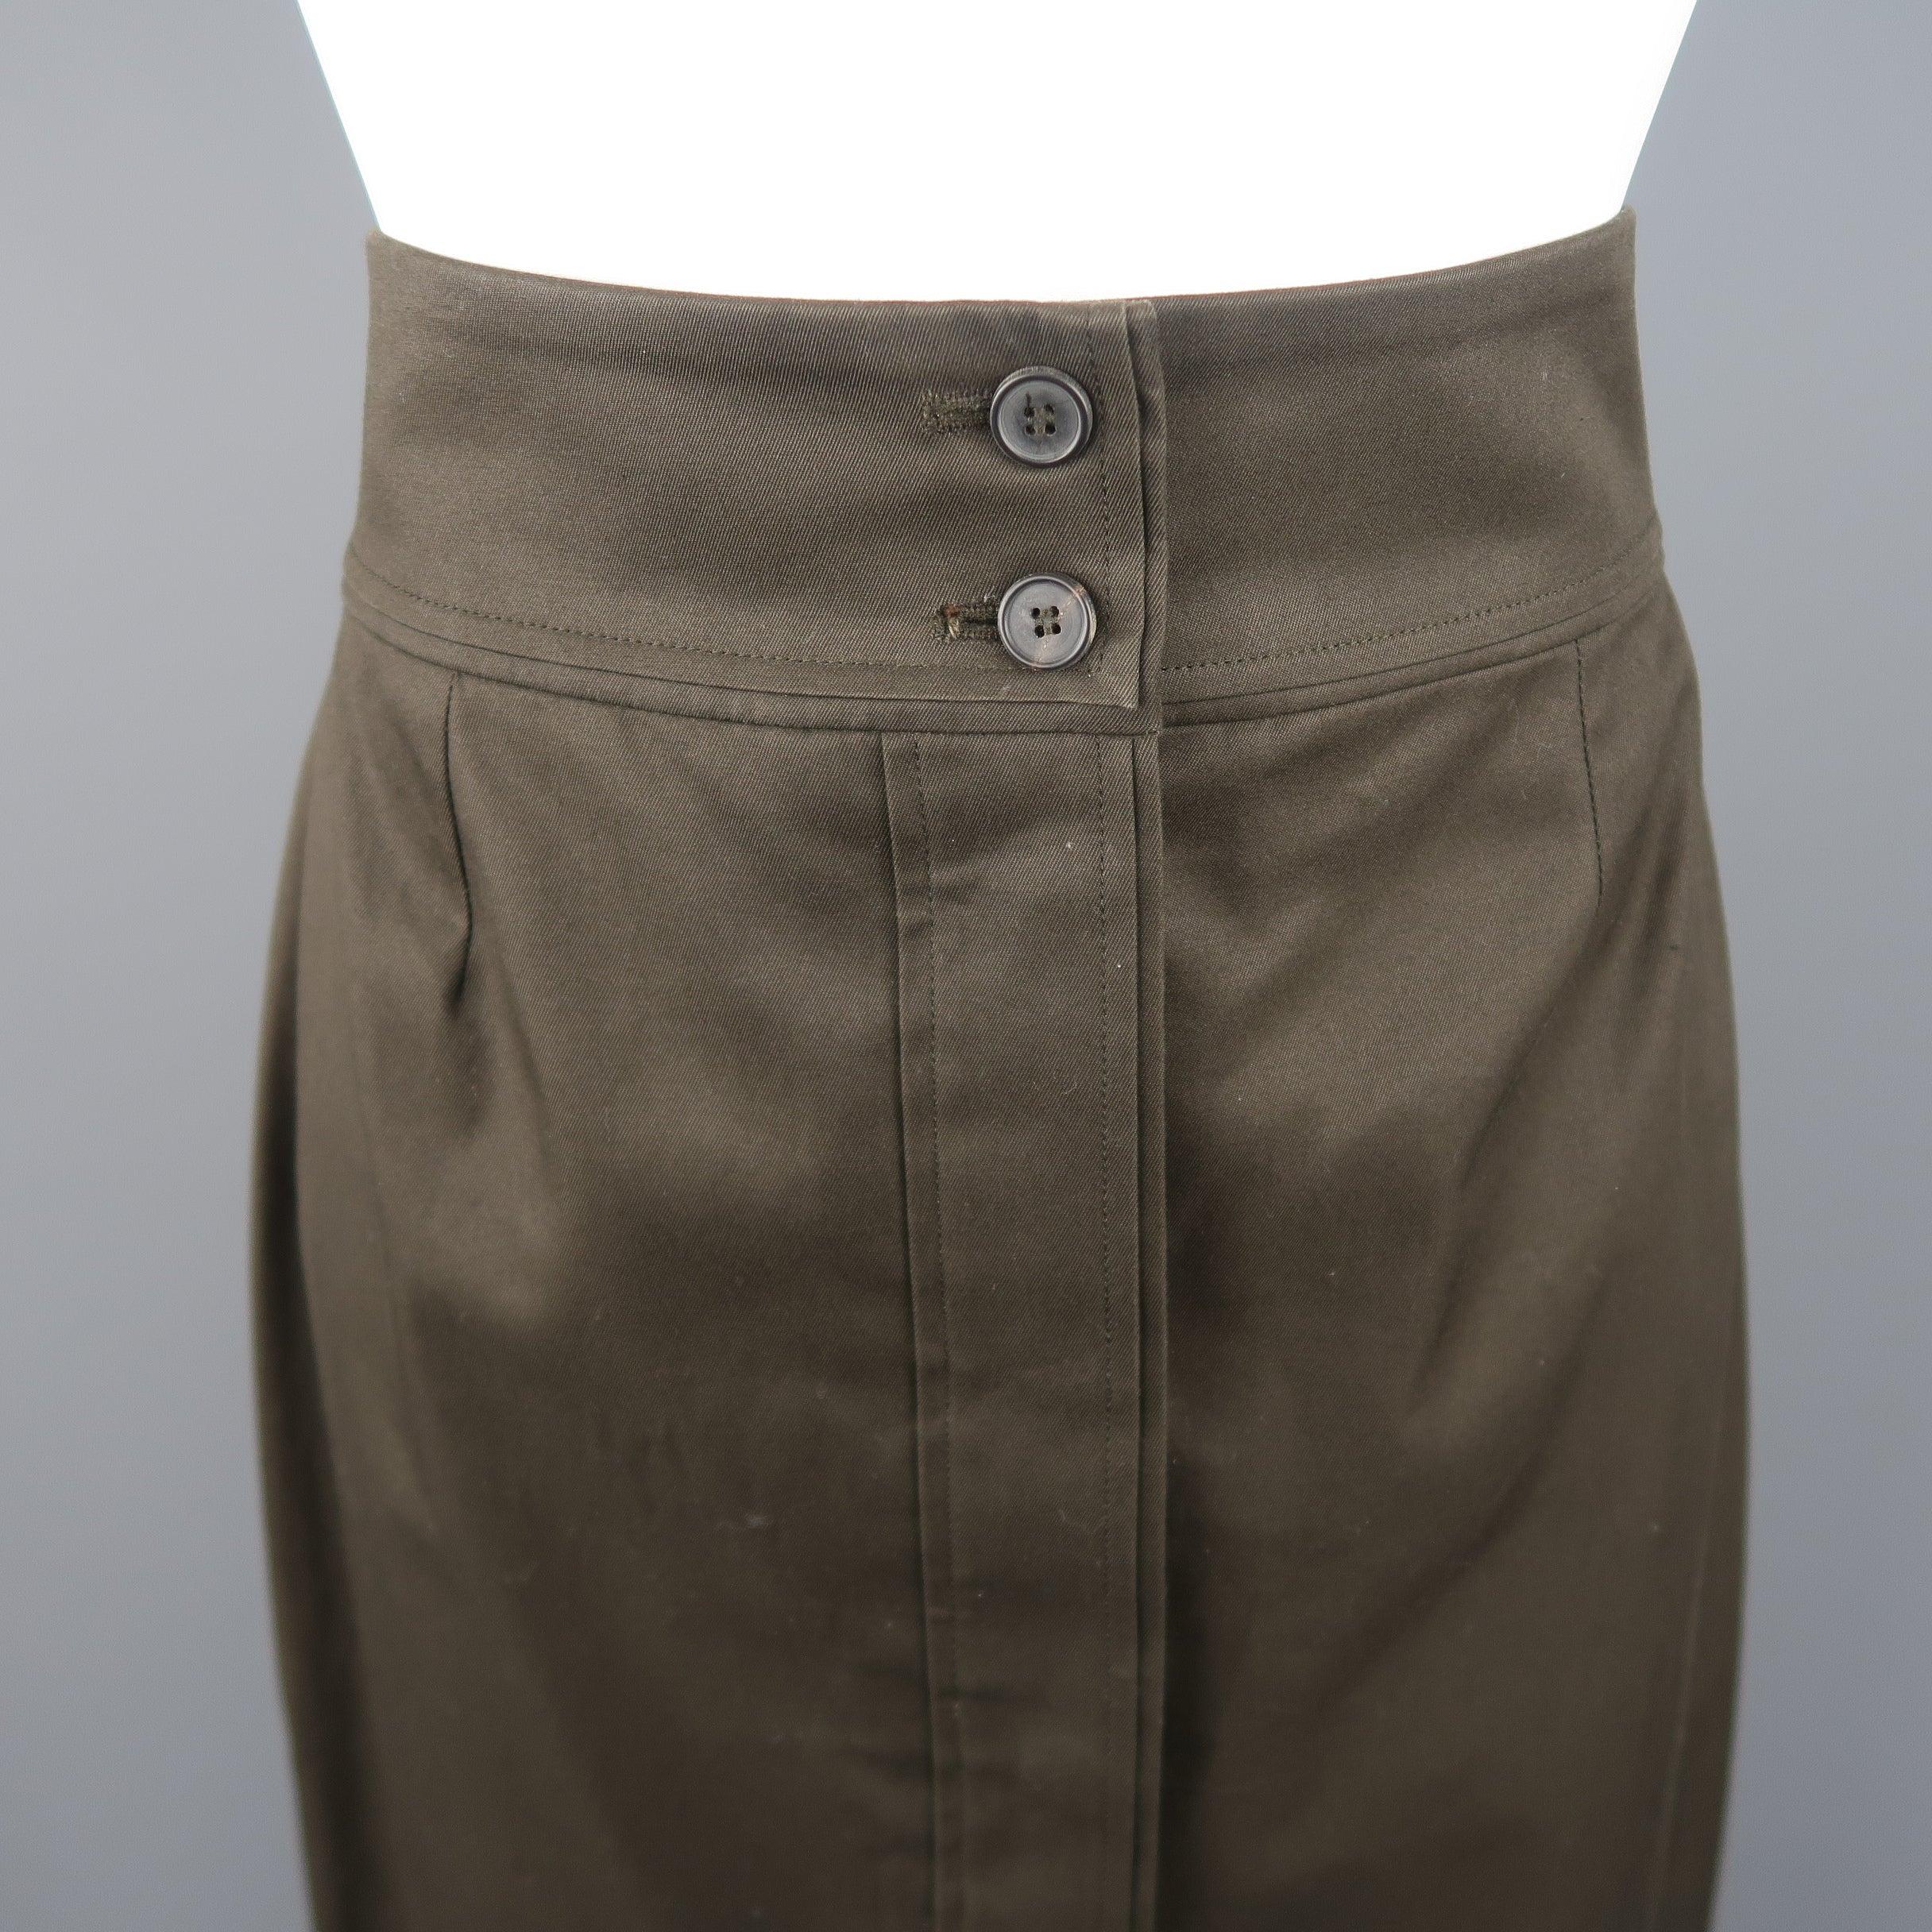 YVES SAINT LAURENT by TOM FORD Rive Gauche pencil skirt, come in cotton in dark green tone, with button frontal closure, pale waist and pleat details. Made in France. 
Good Pre-Owned Condition.
 

Marked:   FR 40
 

Measurements: 
  
Waist: 29